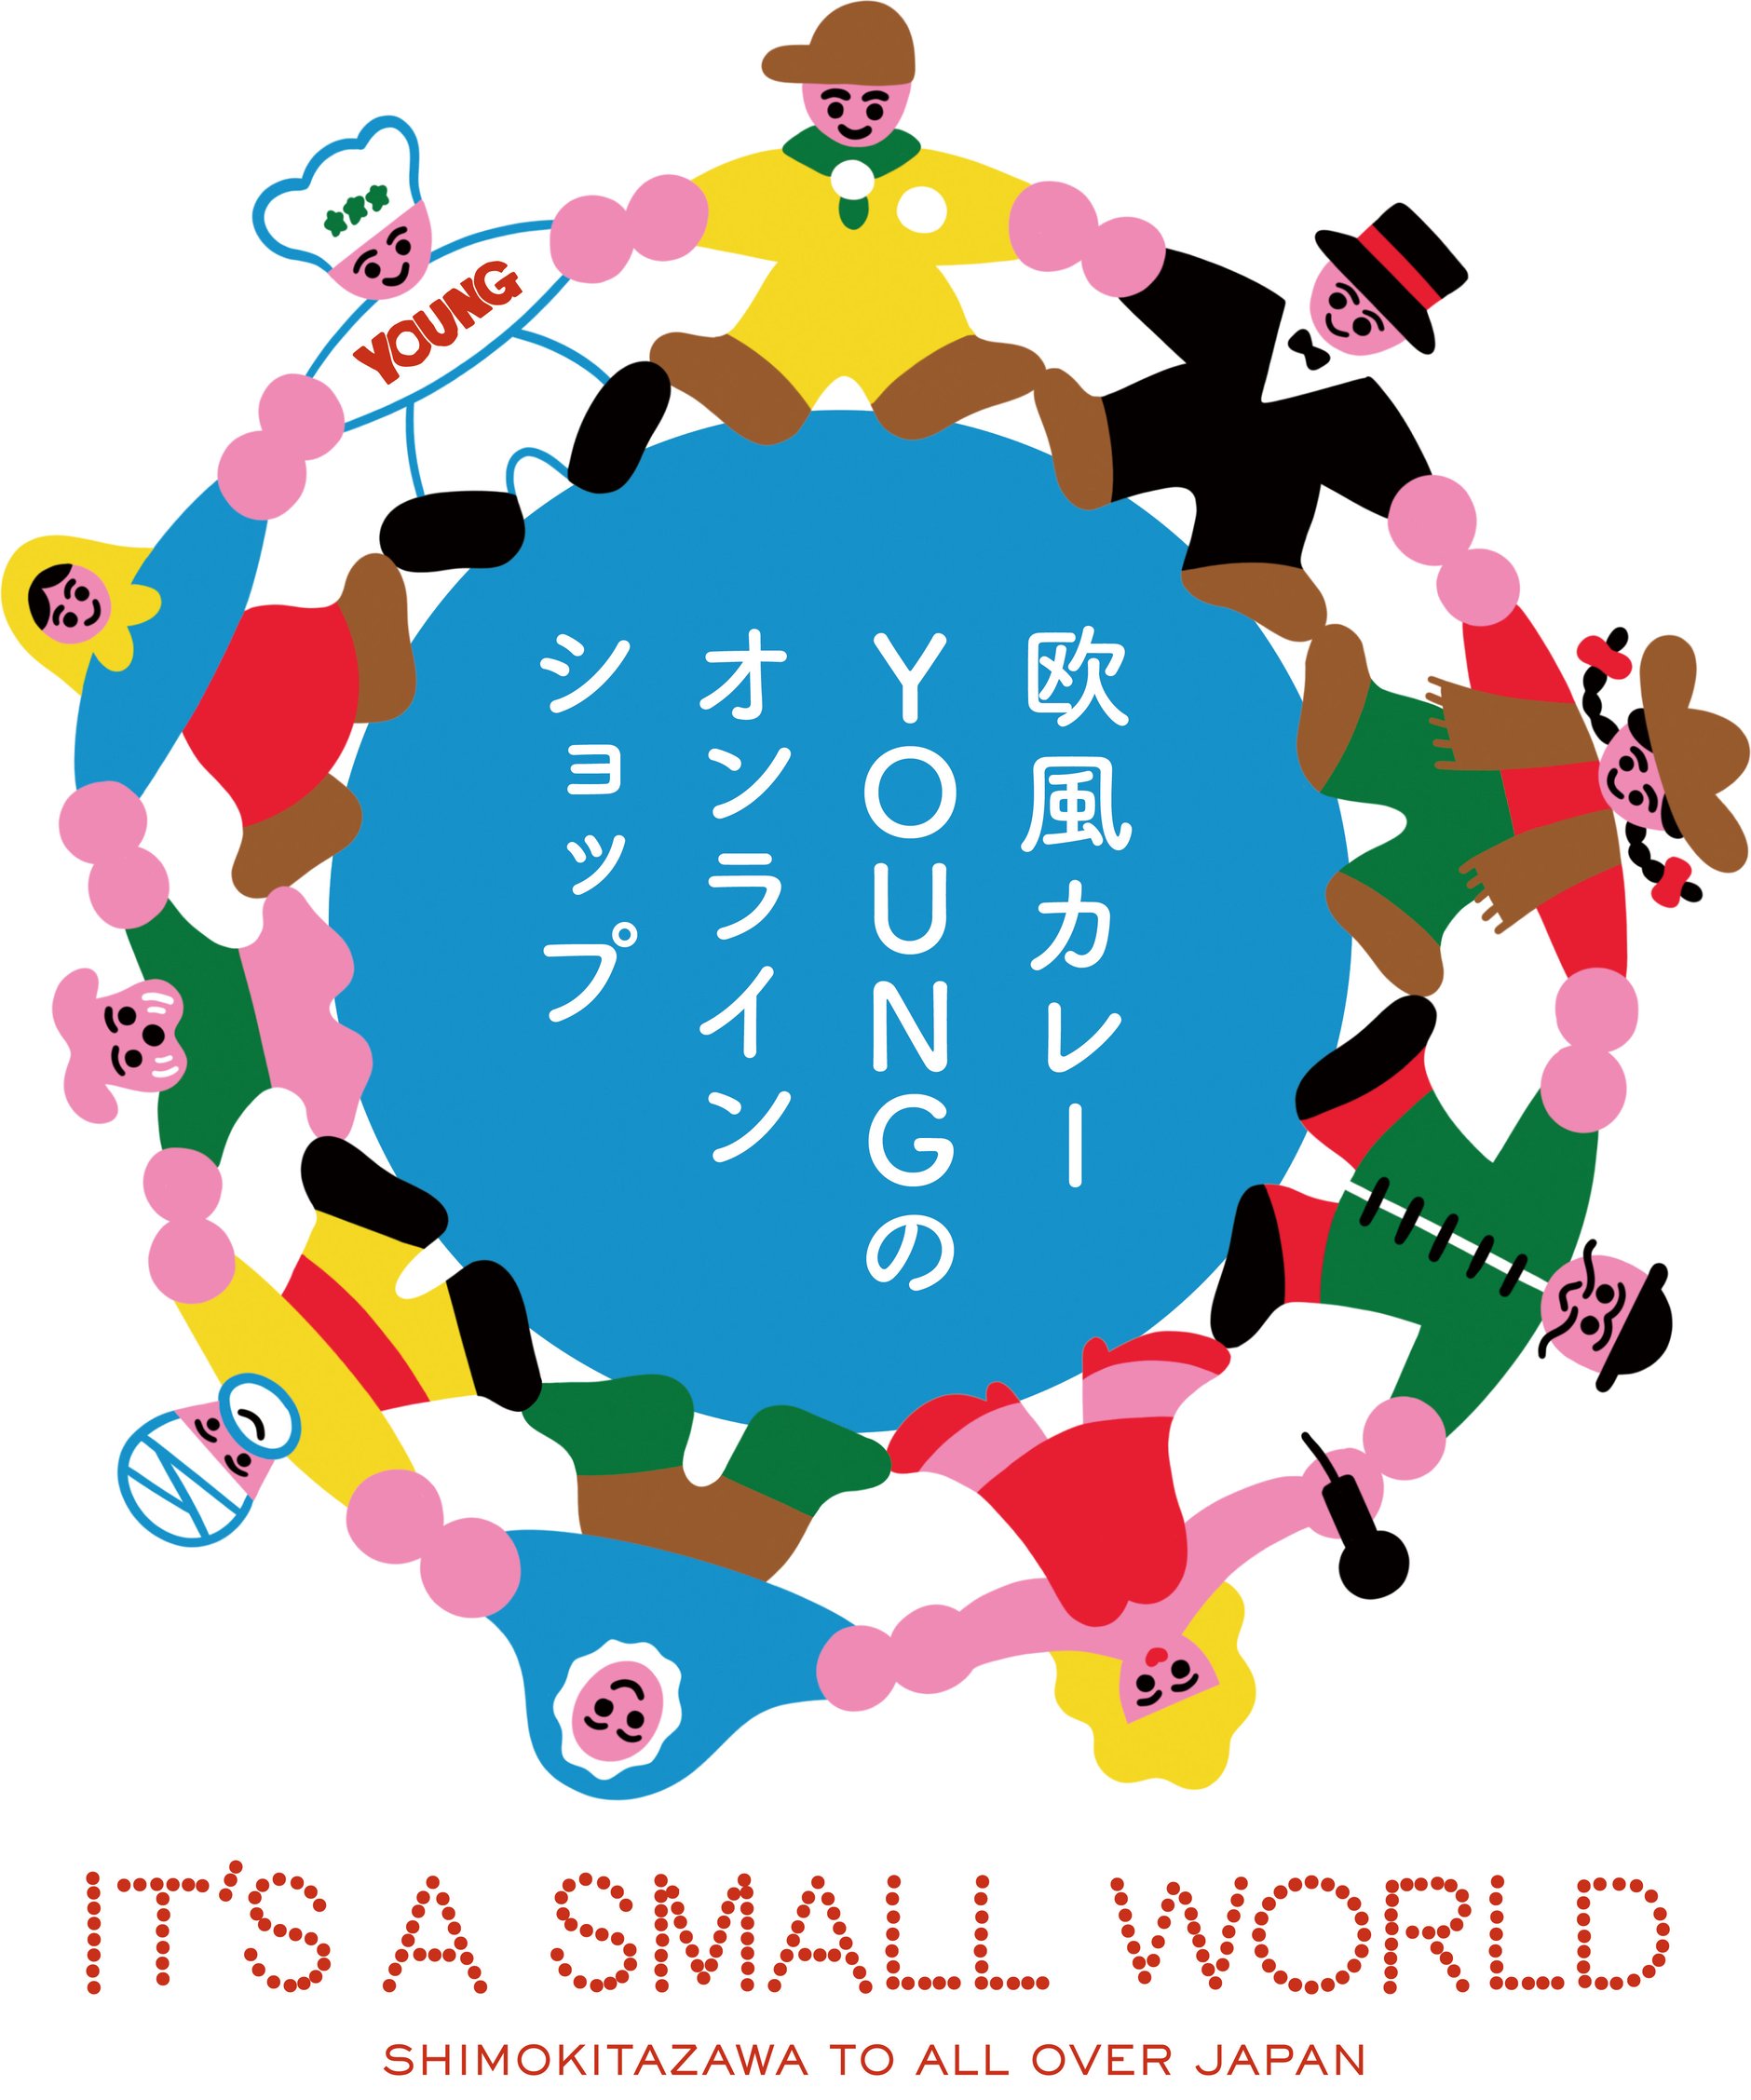 IT'S A SMALL WORLD by YOUNG